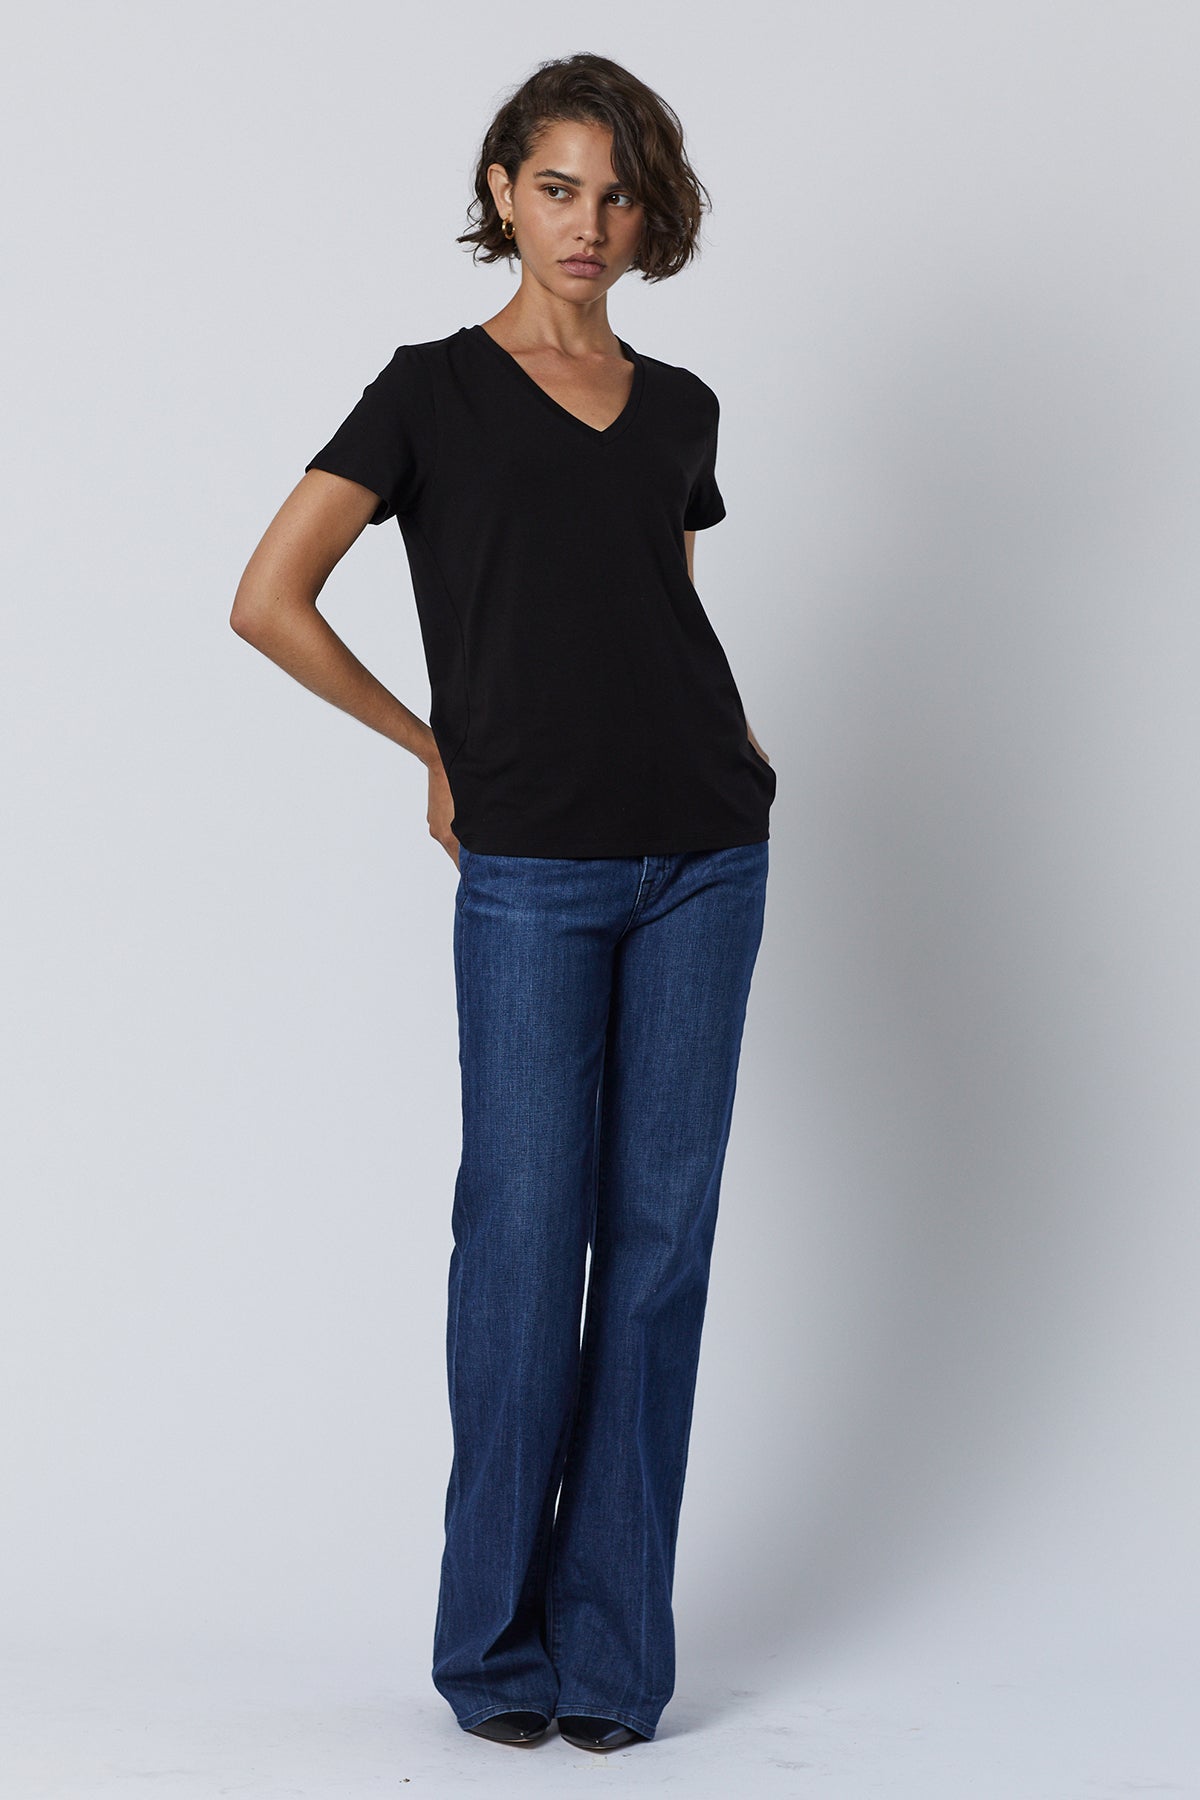 Runyon Tee in black with blue denim and black heels full length front-26007207215297